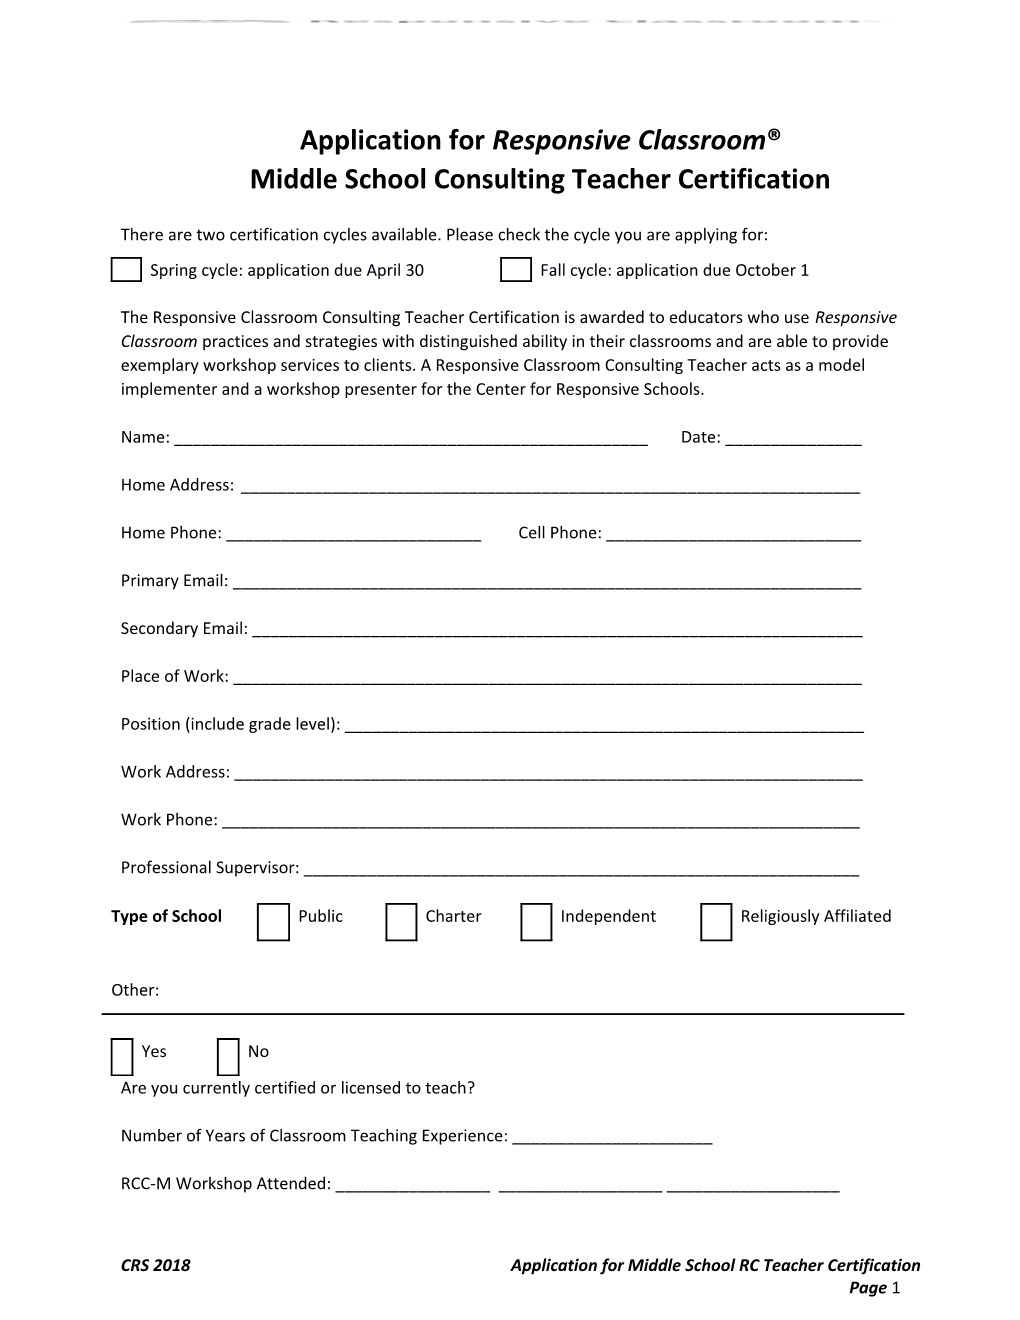 Application for Responsive Classroom